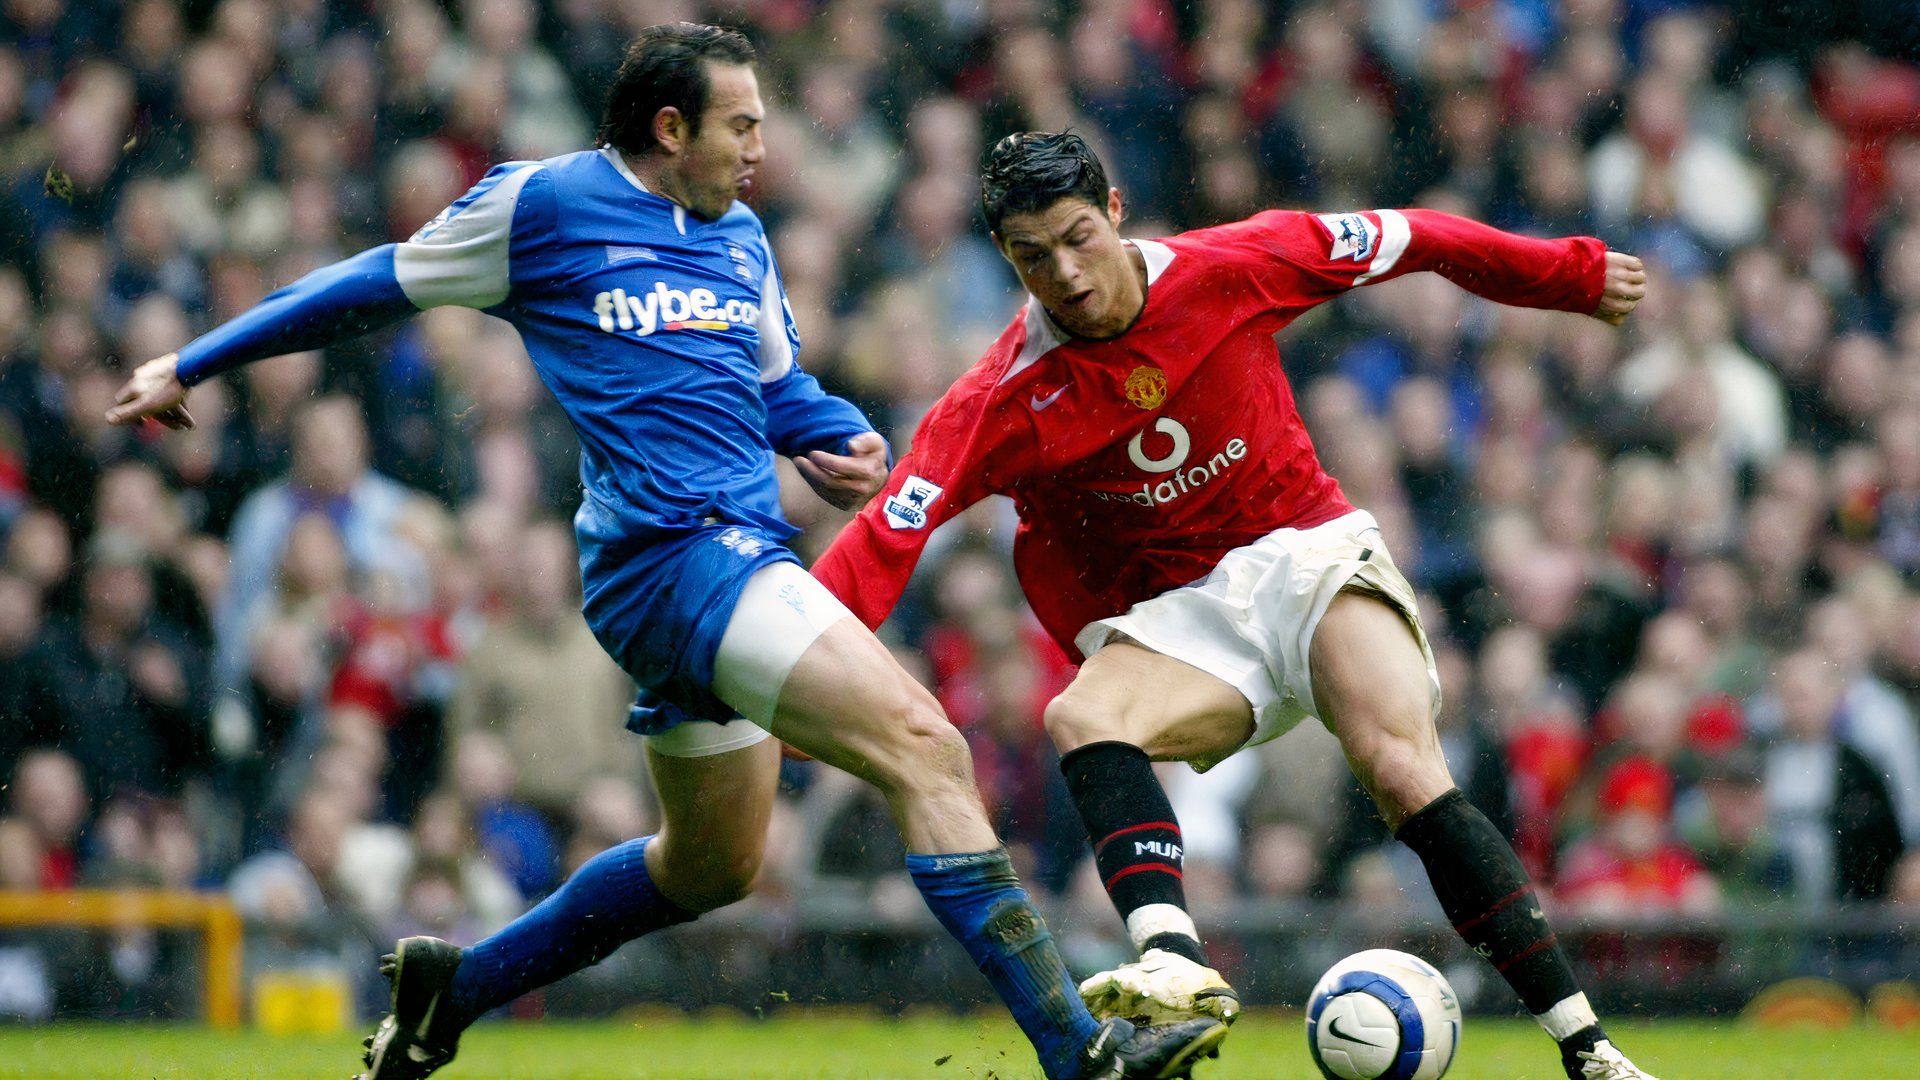 Stan Lazaridis battles with Manchester United's Cristiano Ronaldo in March 2006